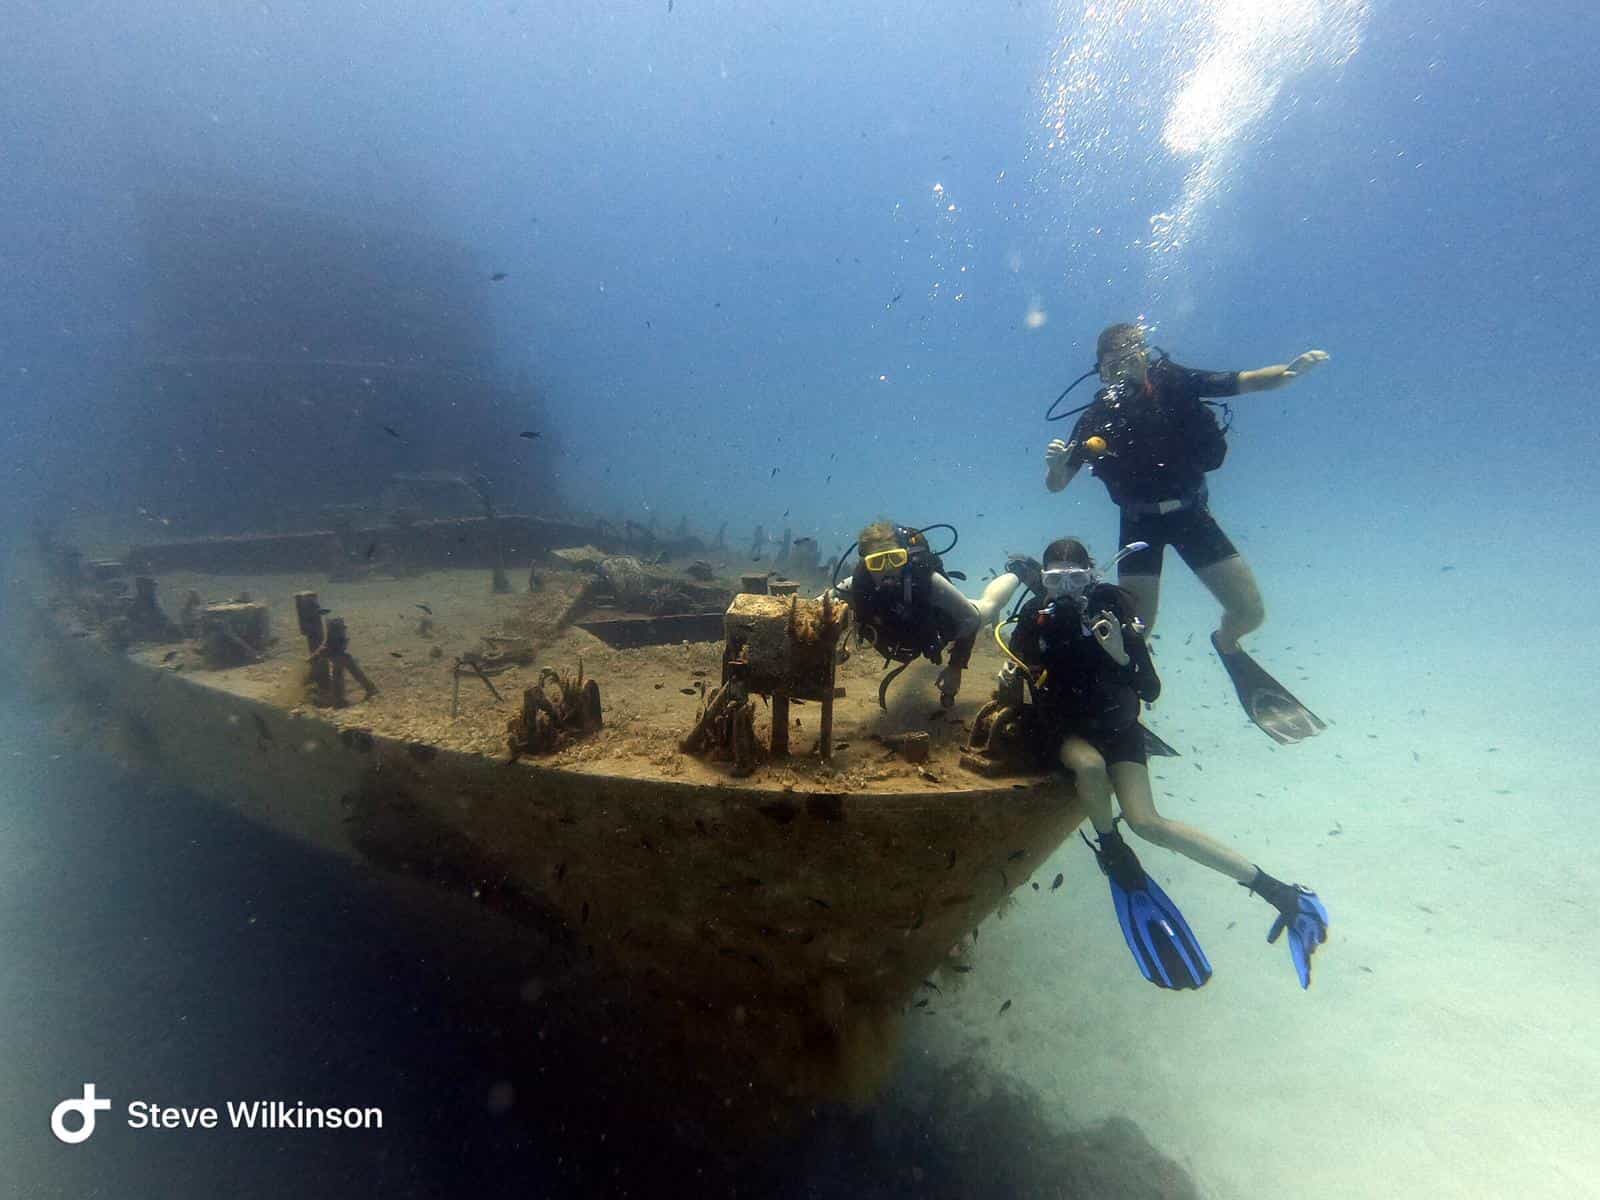 A group of scuba divers at one of Malta's shipwrecks